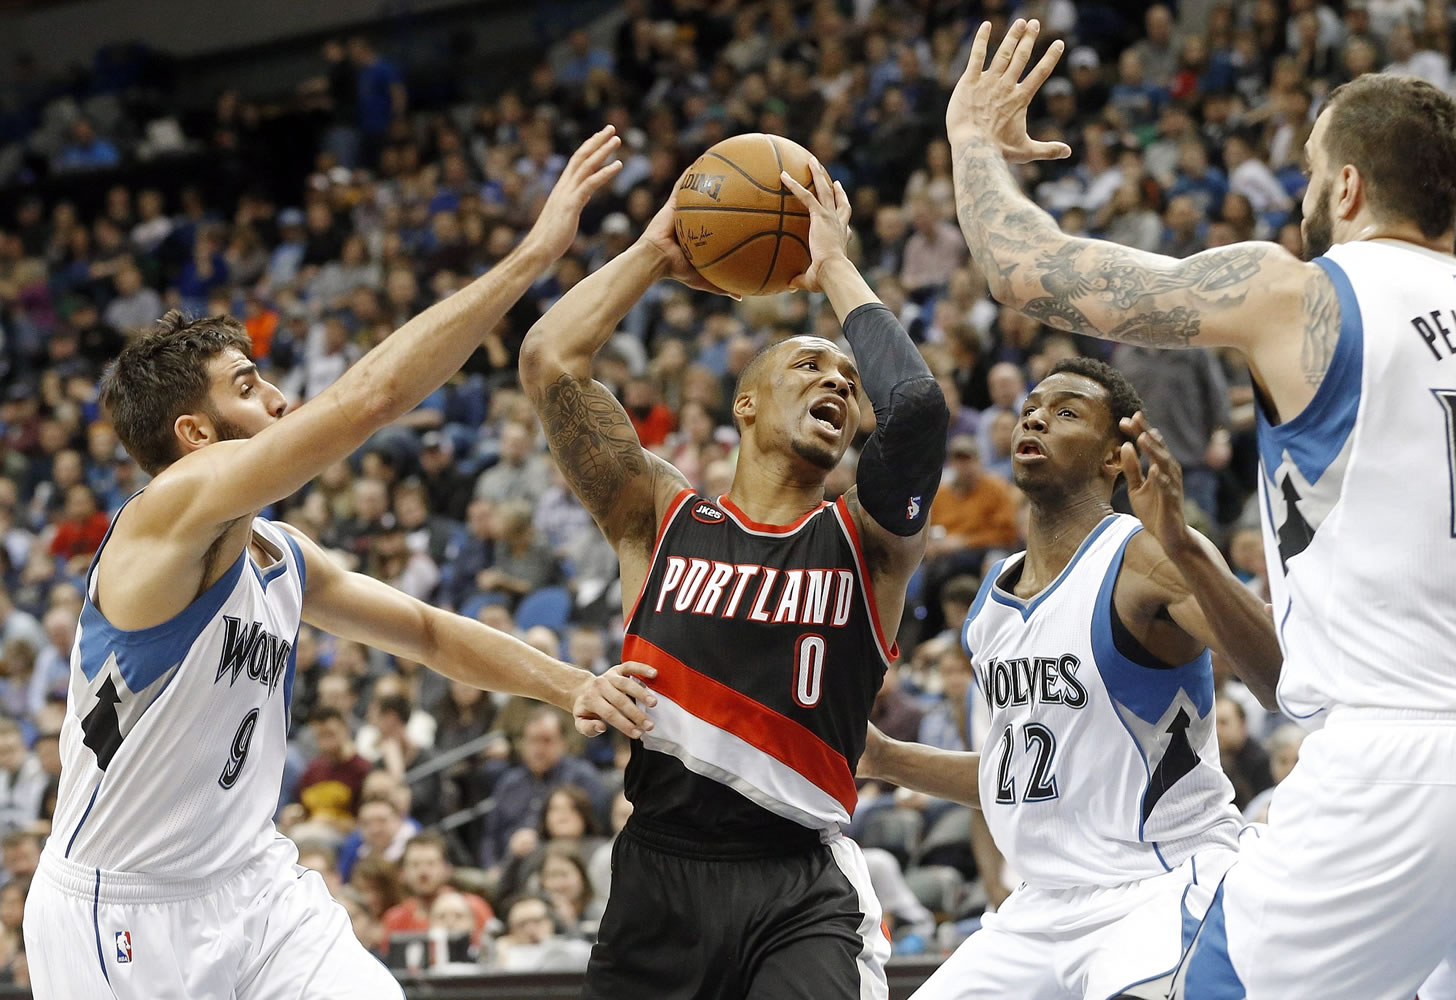 Portland Trail Blazers' Damian Lillard (0) finds himself triple-teamed by Minnesota Timberwolves' Ricky Rubio, left, Andrew Wiggins (22) and Nikola Pekovic, in the second half Saturday, March 7, 2015, in Minneapolis. The Timberwolves won 121-113. Lillard led the Trail Blazers with 32 points.